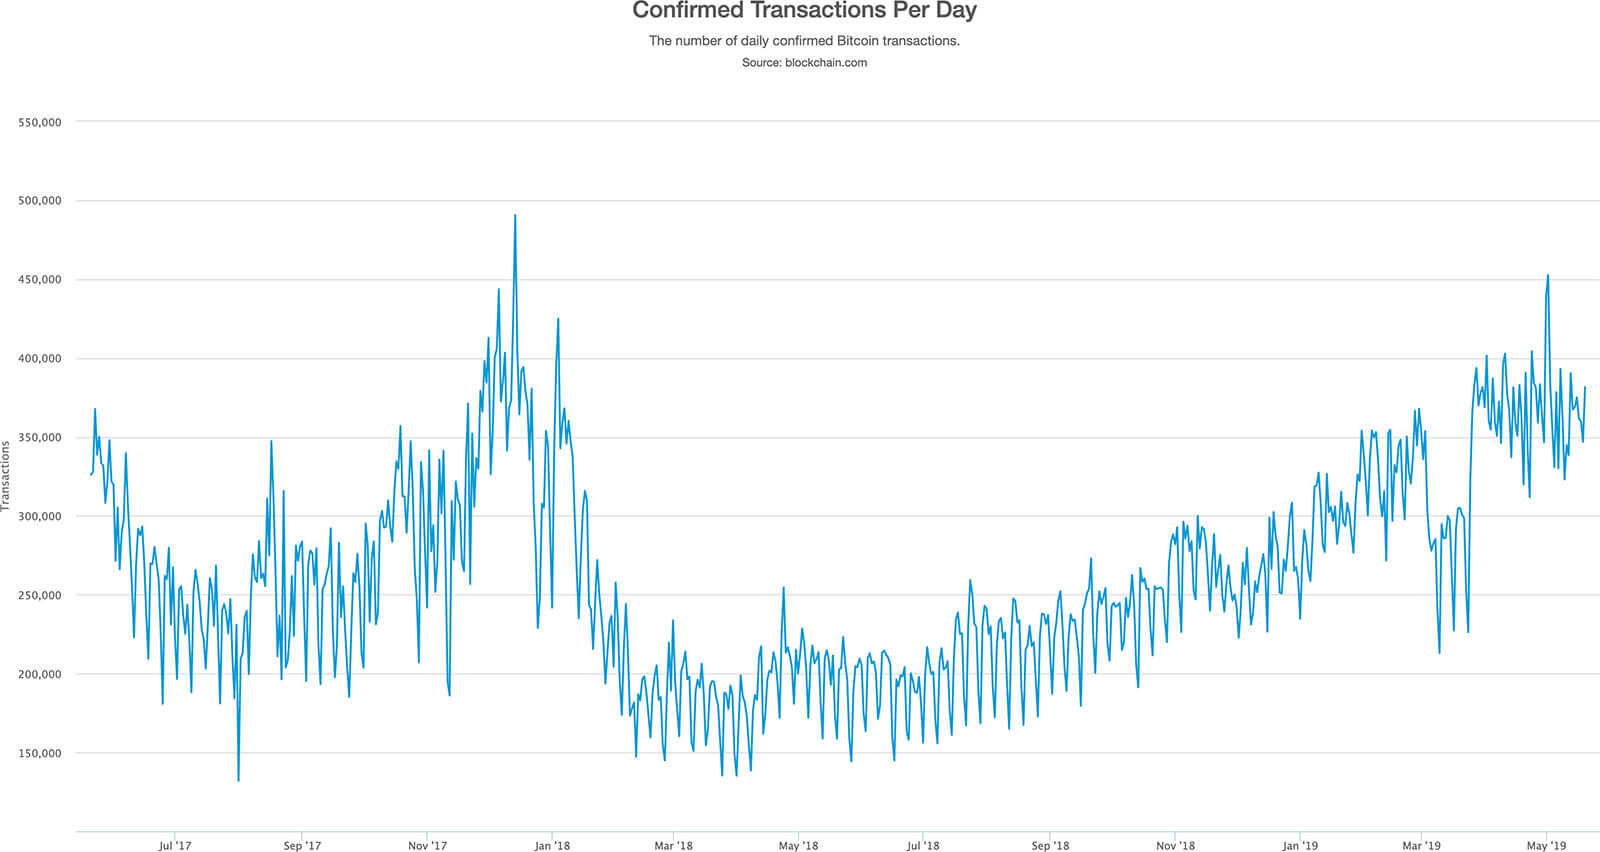 Bitcoin confirmed transactions per day